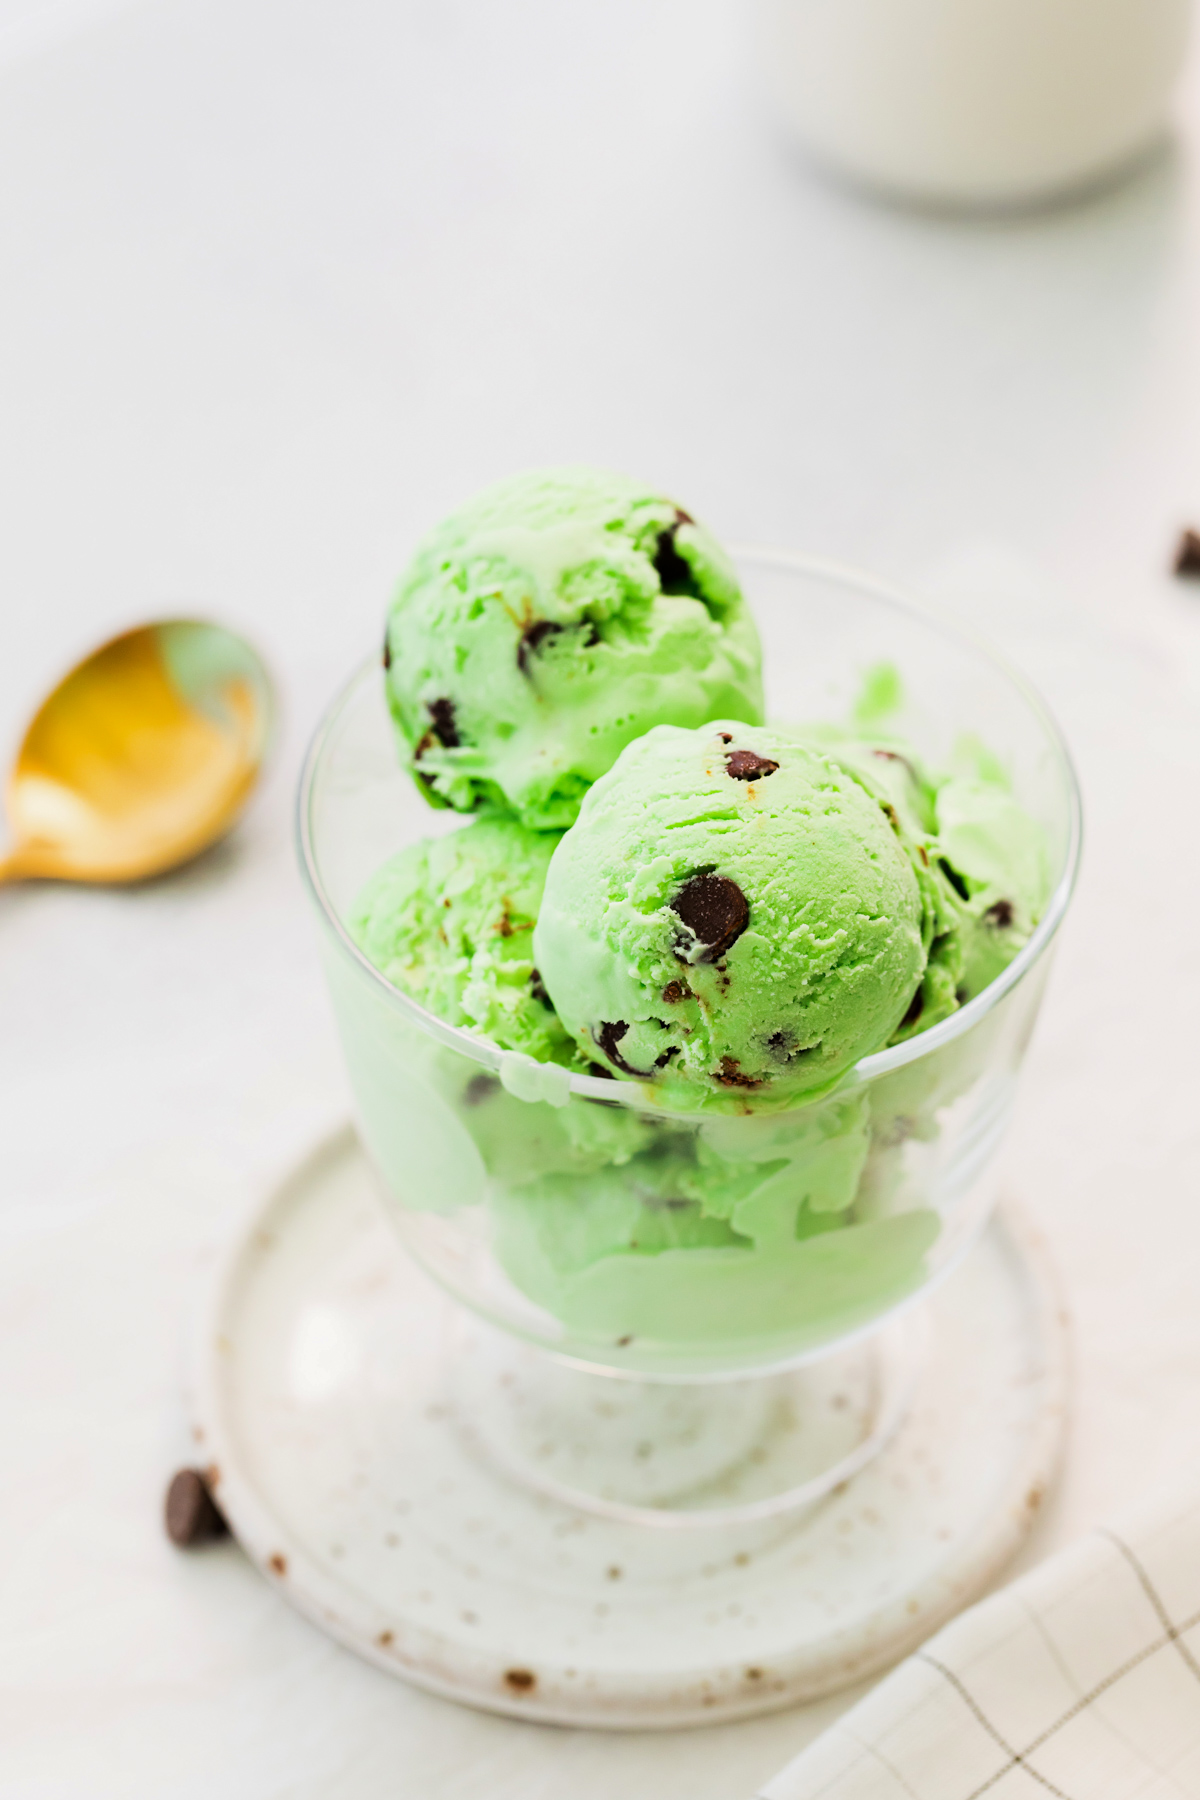 scoops of mint chocolate chip ice cream in a glass dessert bowl